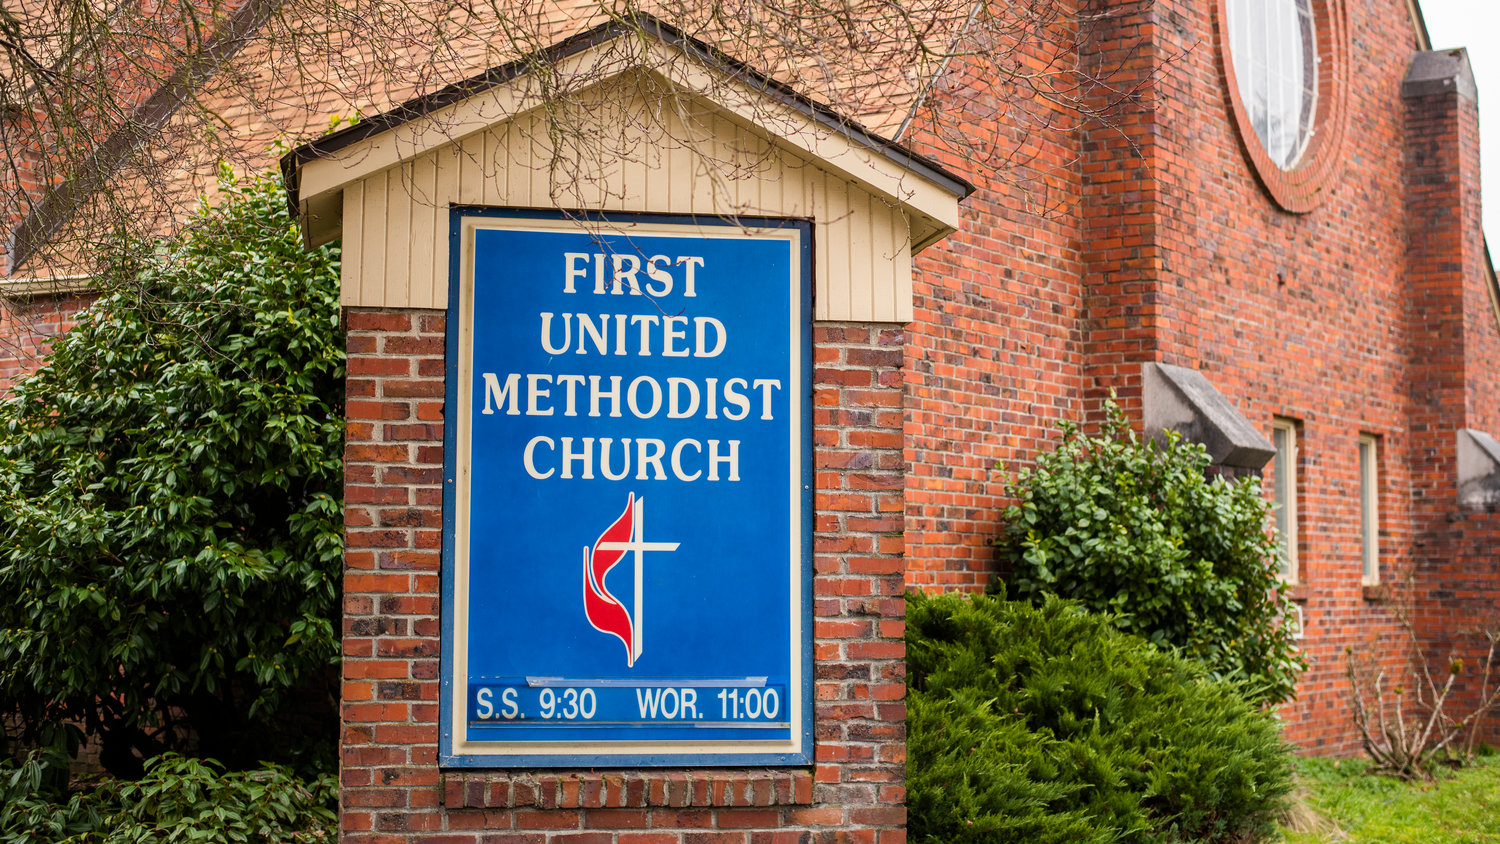 First United Methodist Church is located at 506 South Washington Avenue in Centralia.